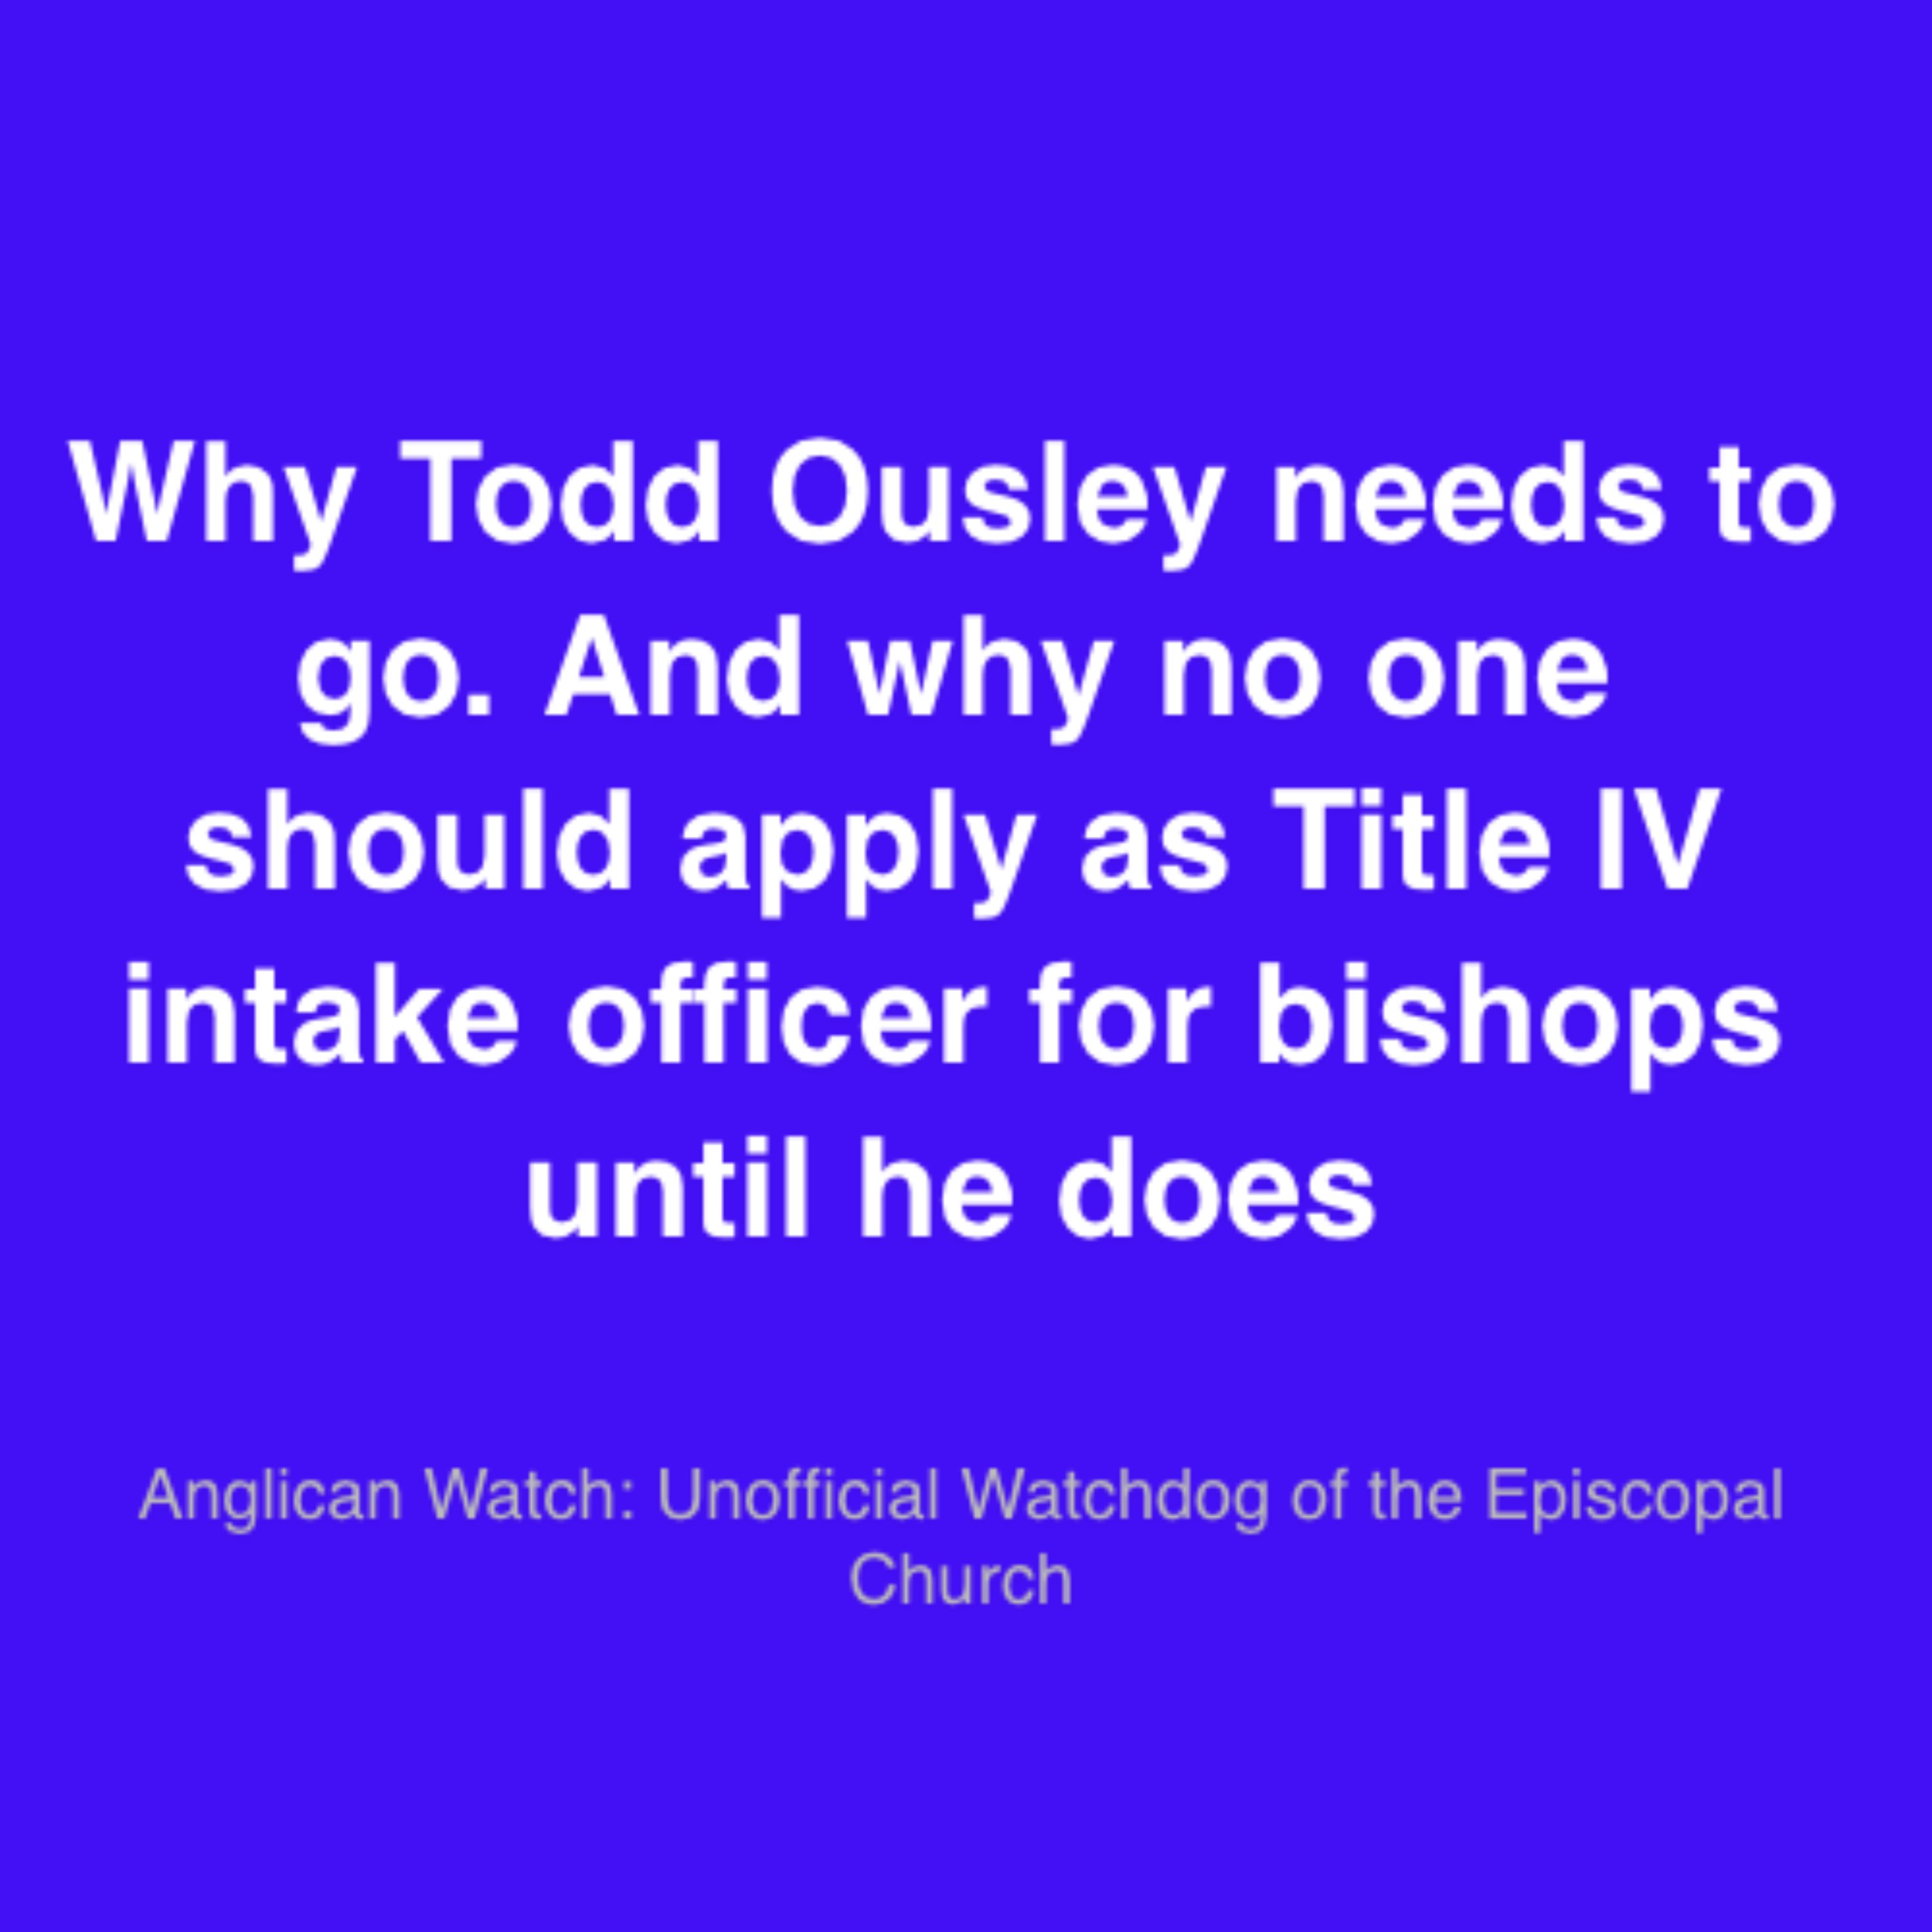 Why Todd Ousley needs to go. And why no one should apply as Title IV intake officer for bishops until he does